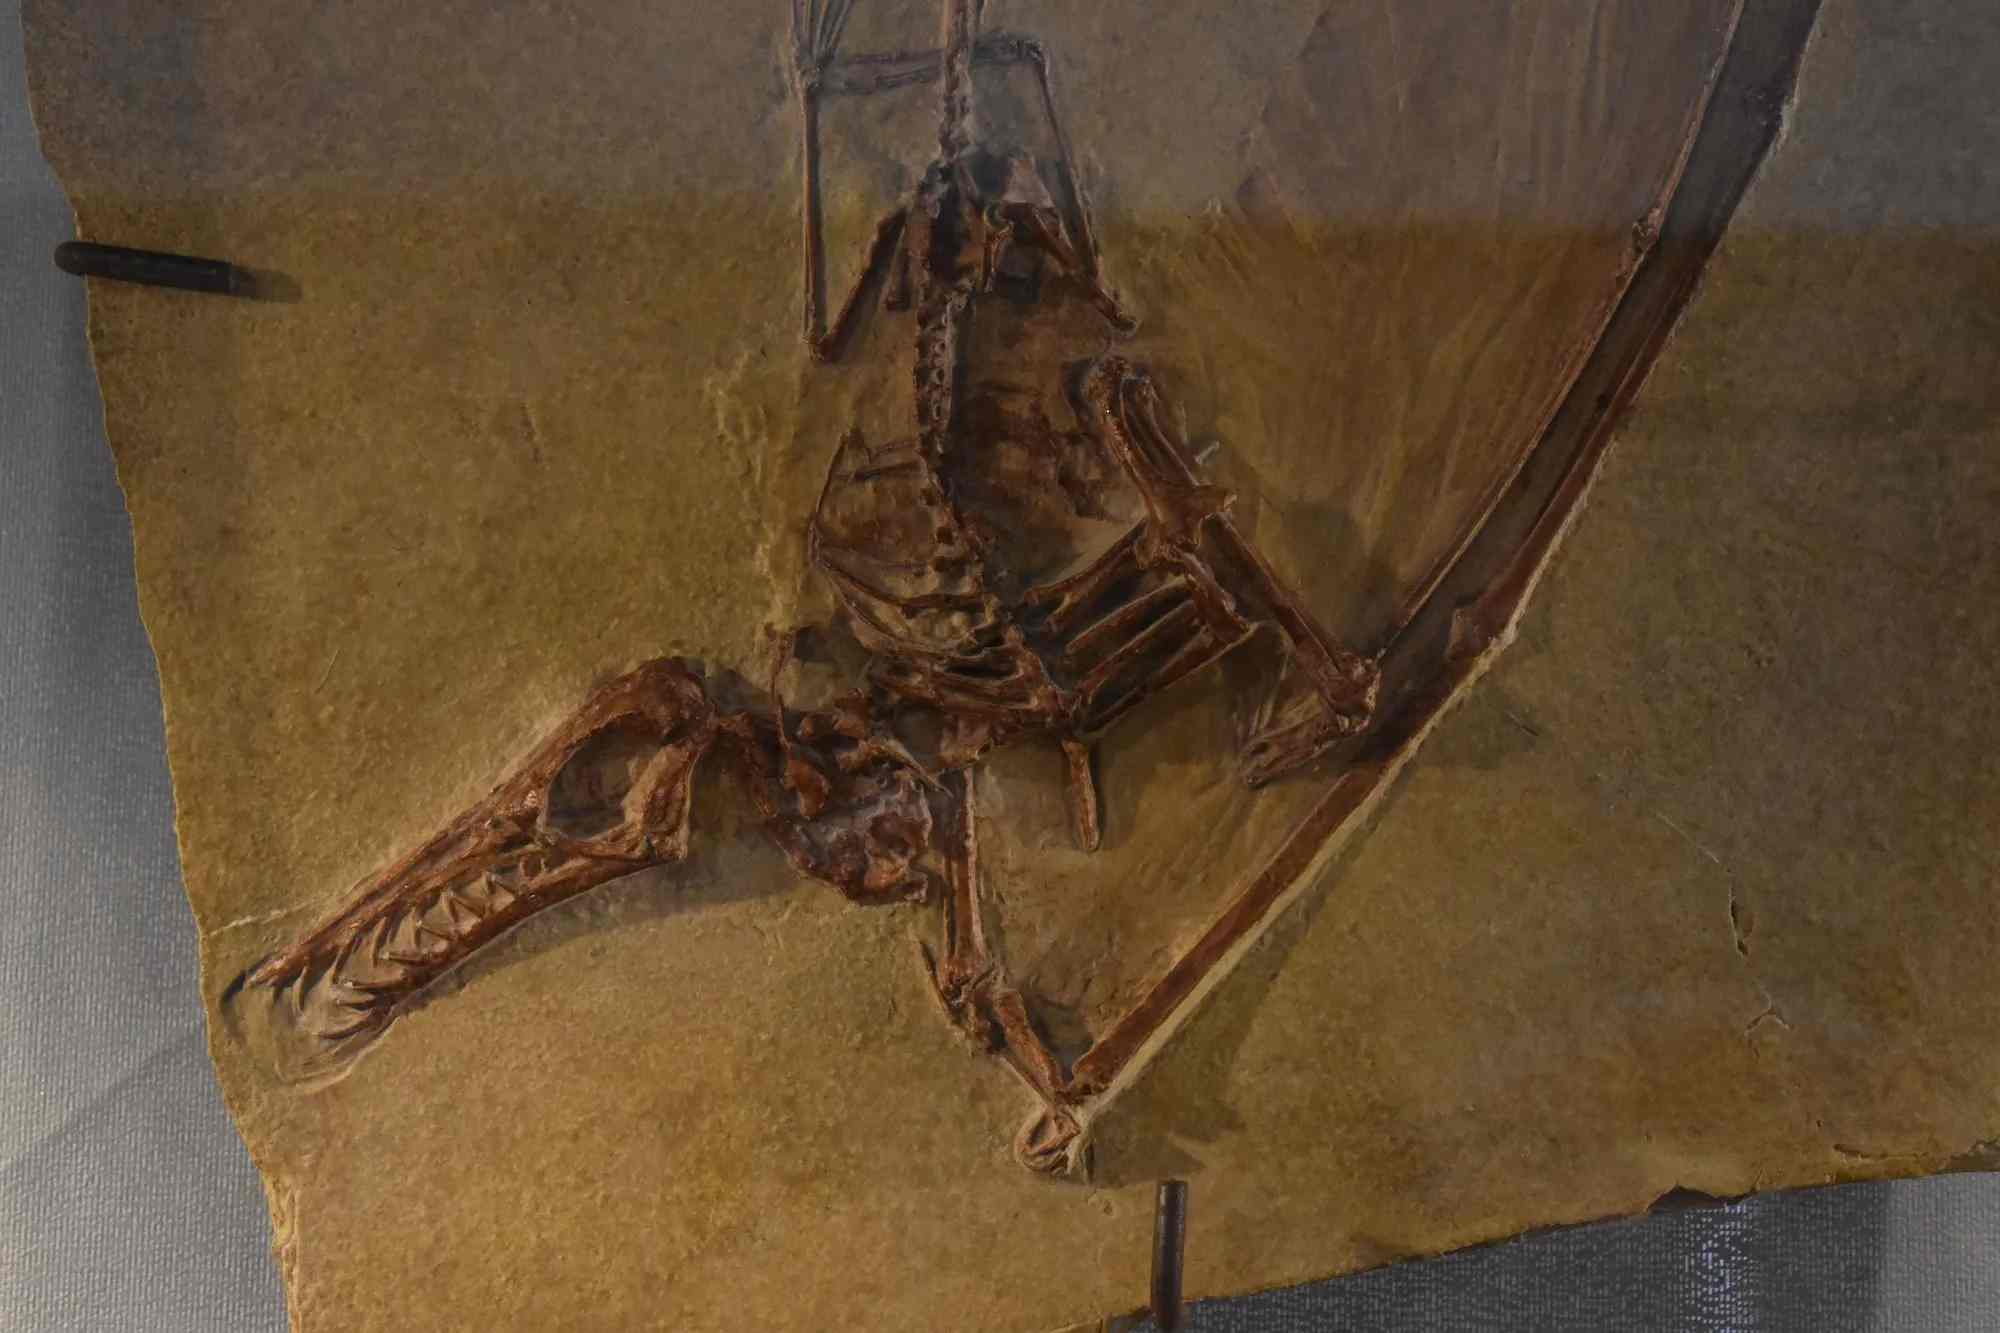 Rhamphorhynchus was a flying reptile from the dinosaur age.